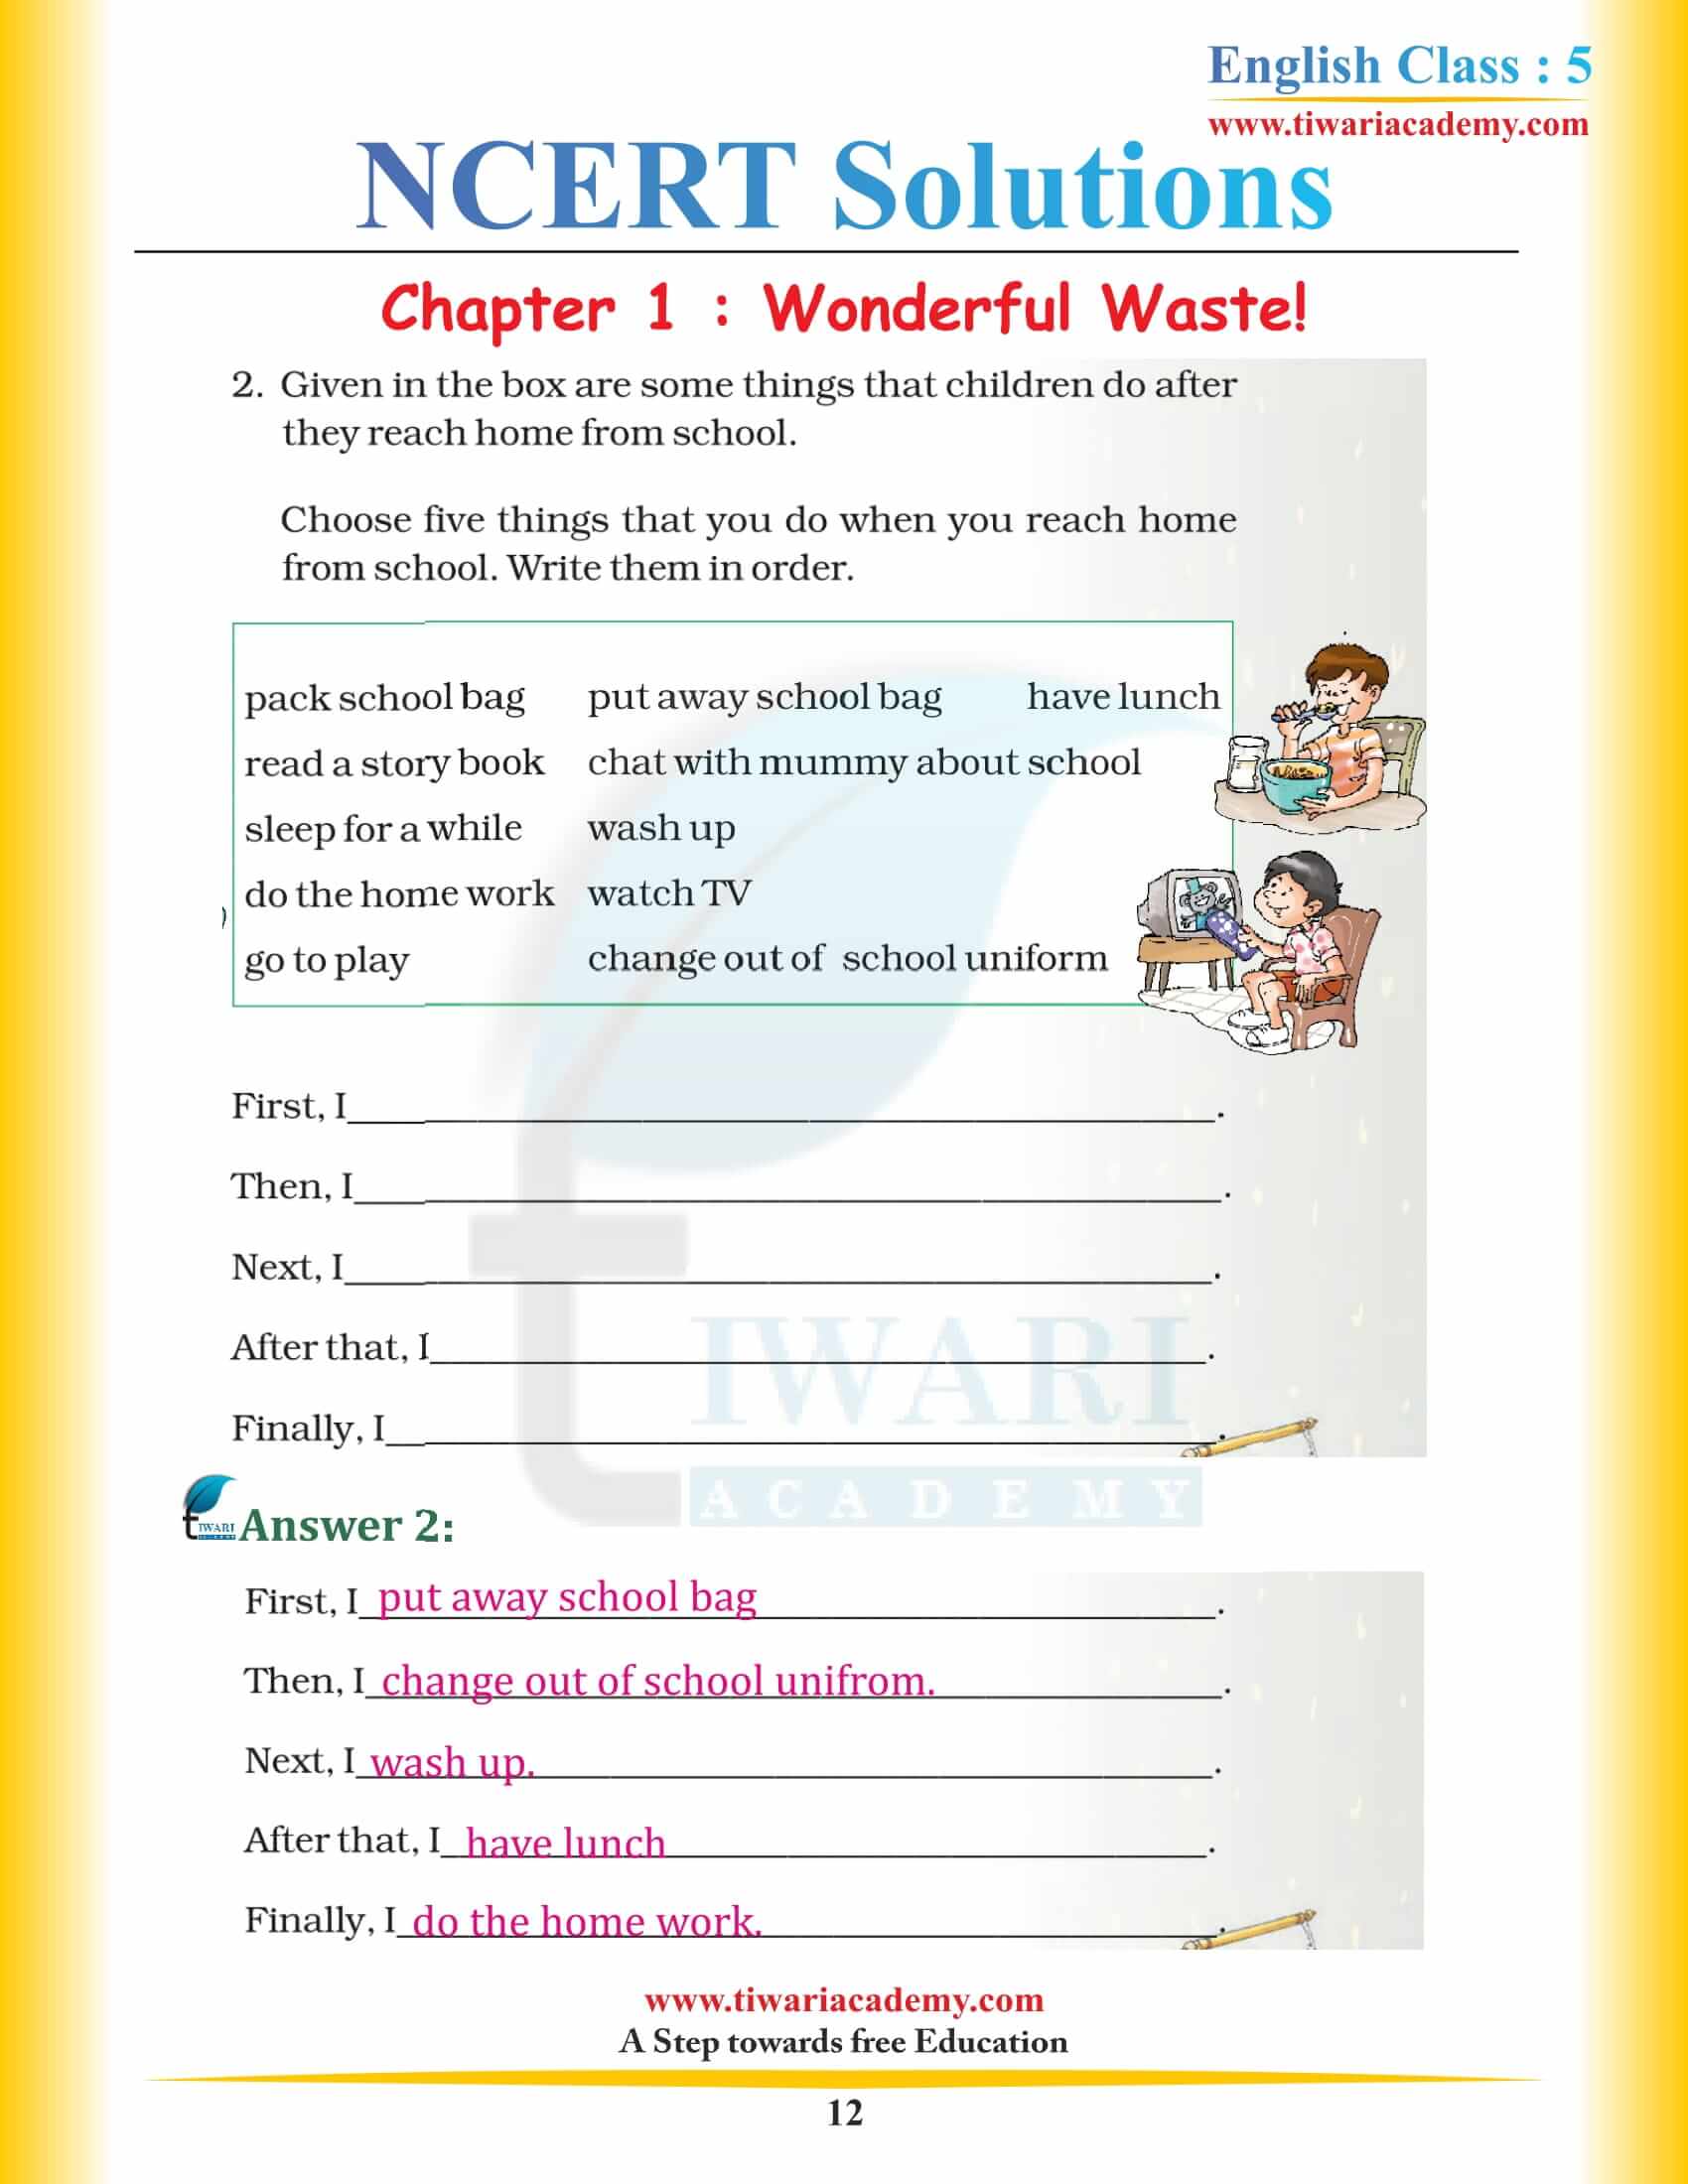 NCERT Solutions for Class 5 English Chapter 1 Wonderful Waste Questions answers